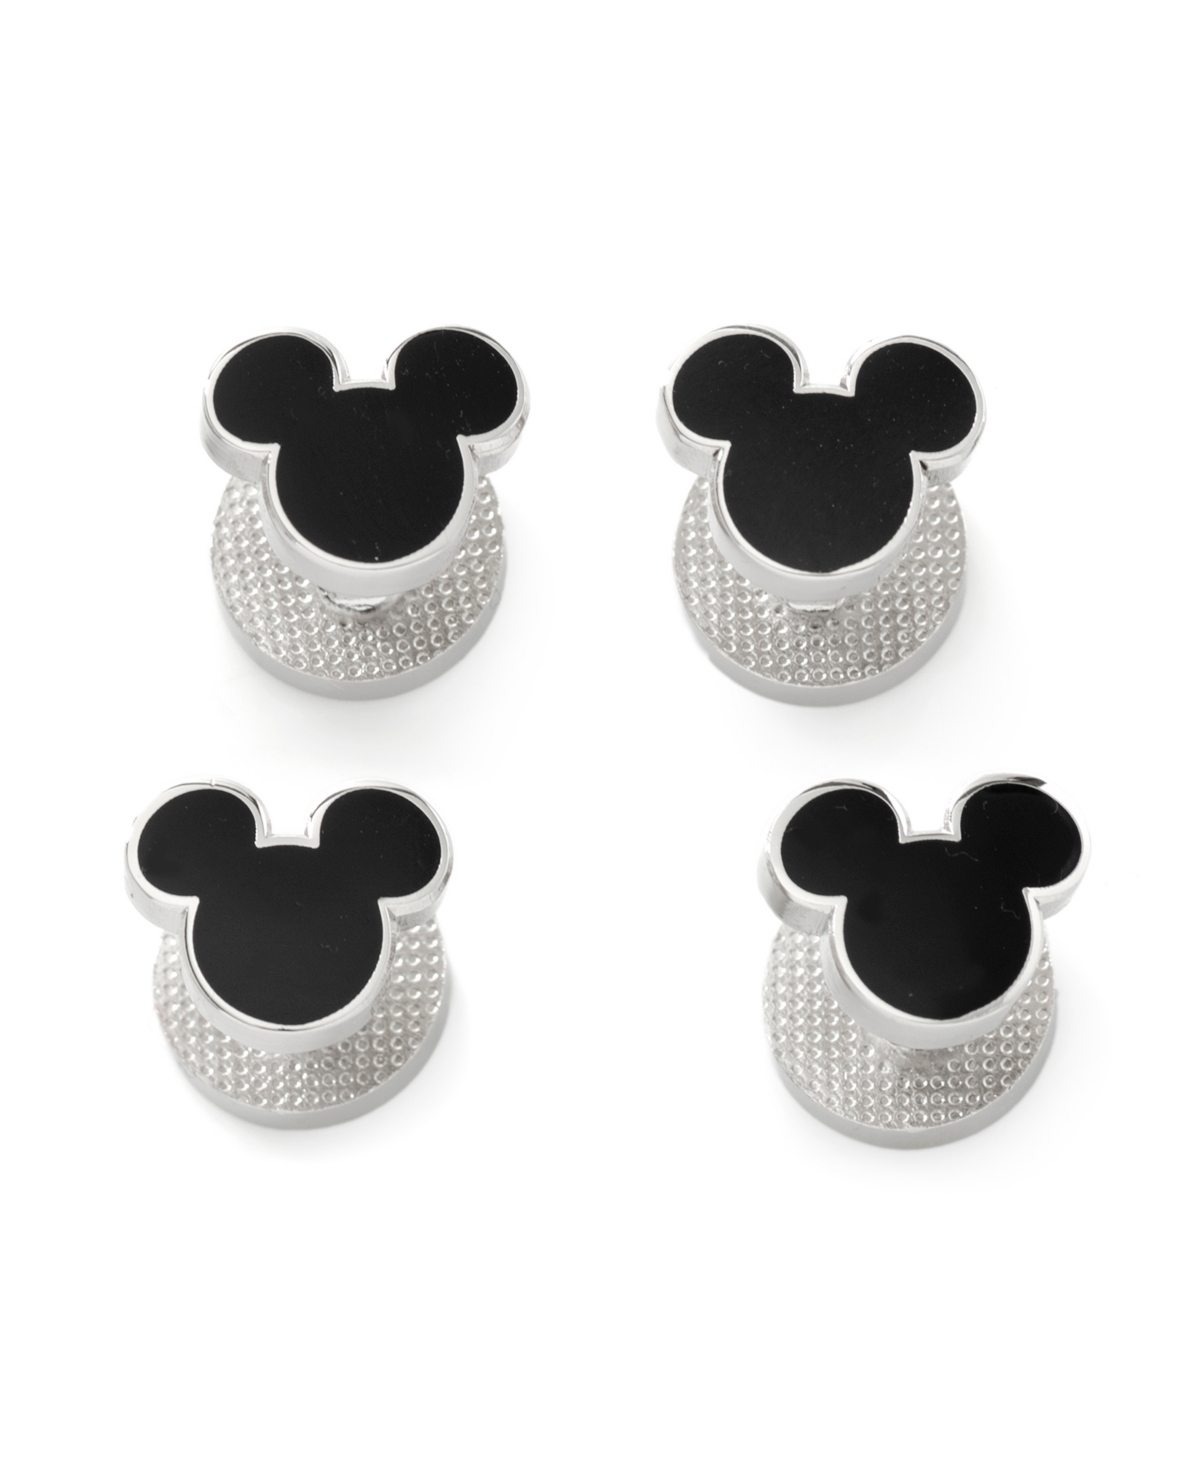 Men's Mickey Mouse Silhouette Studs Set, Pack of 4 - Black